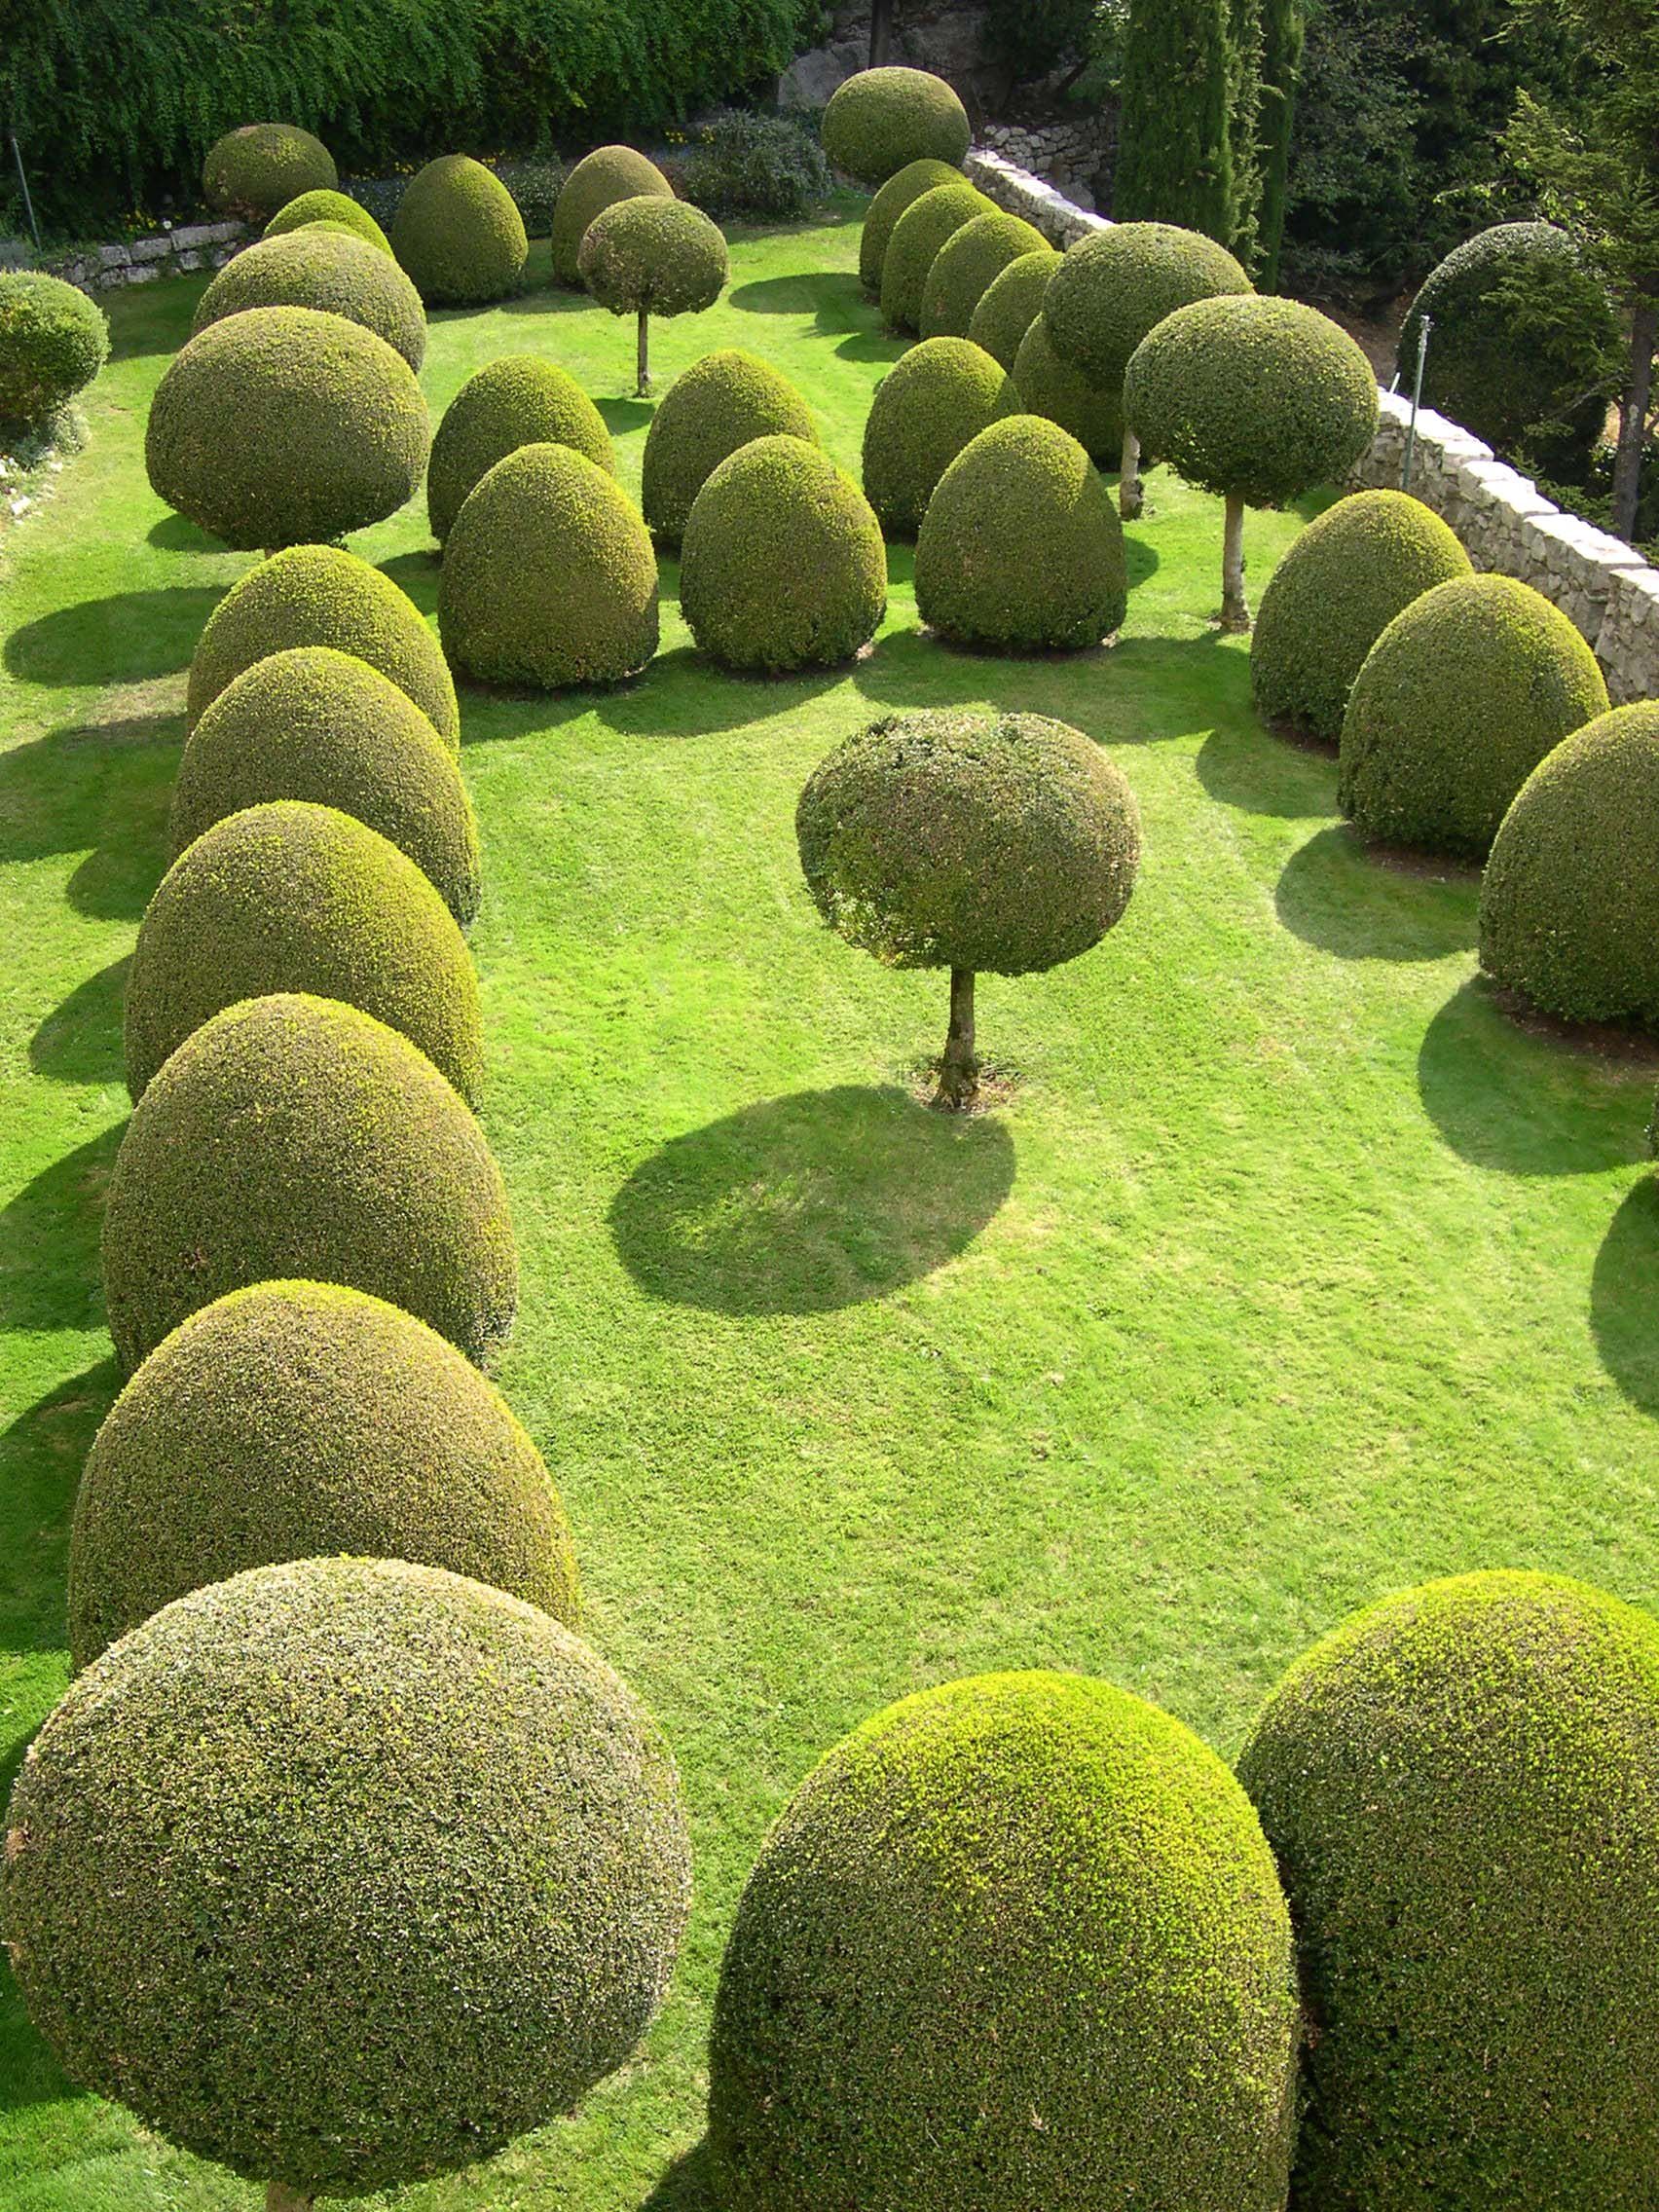 The Most Elaborate Hedges